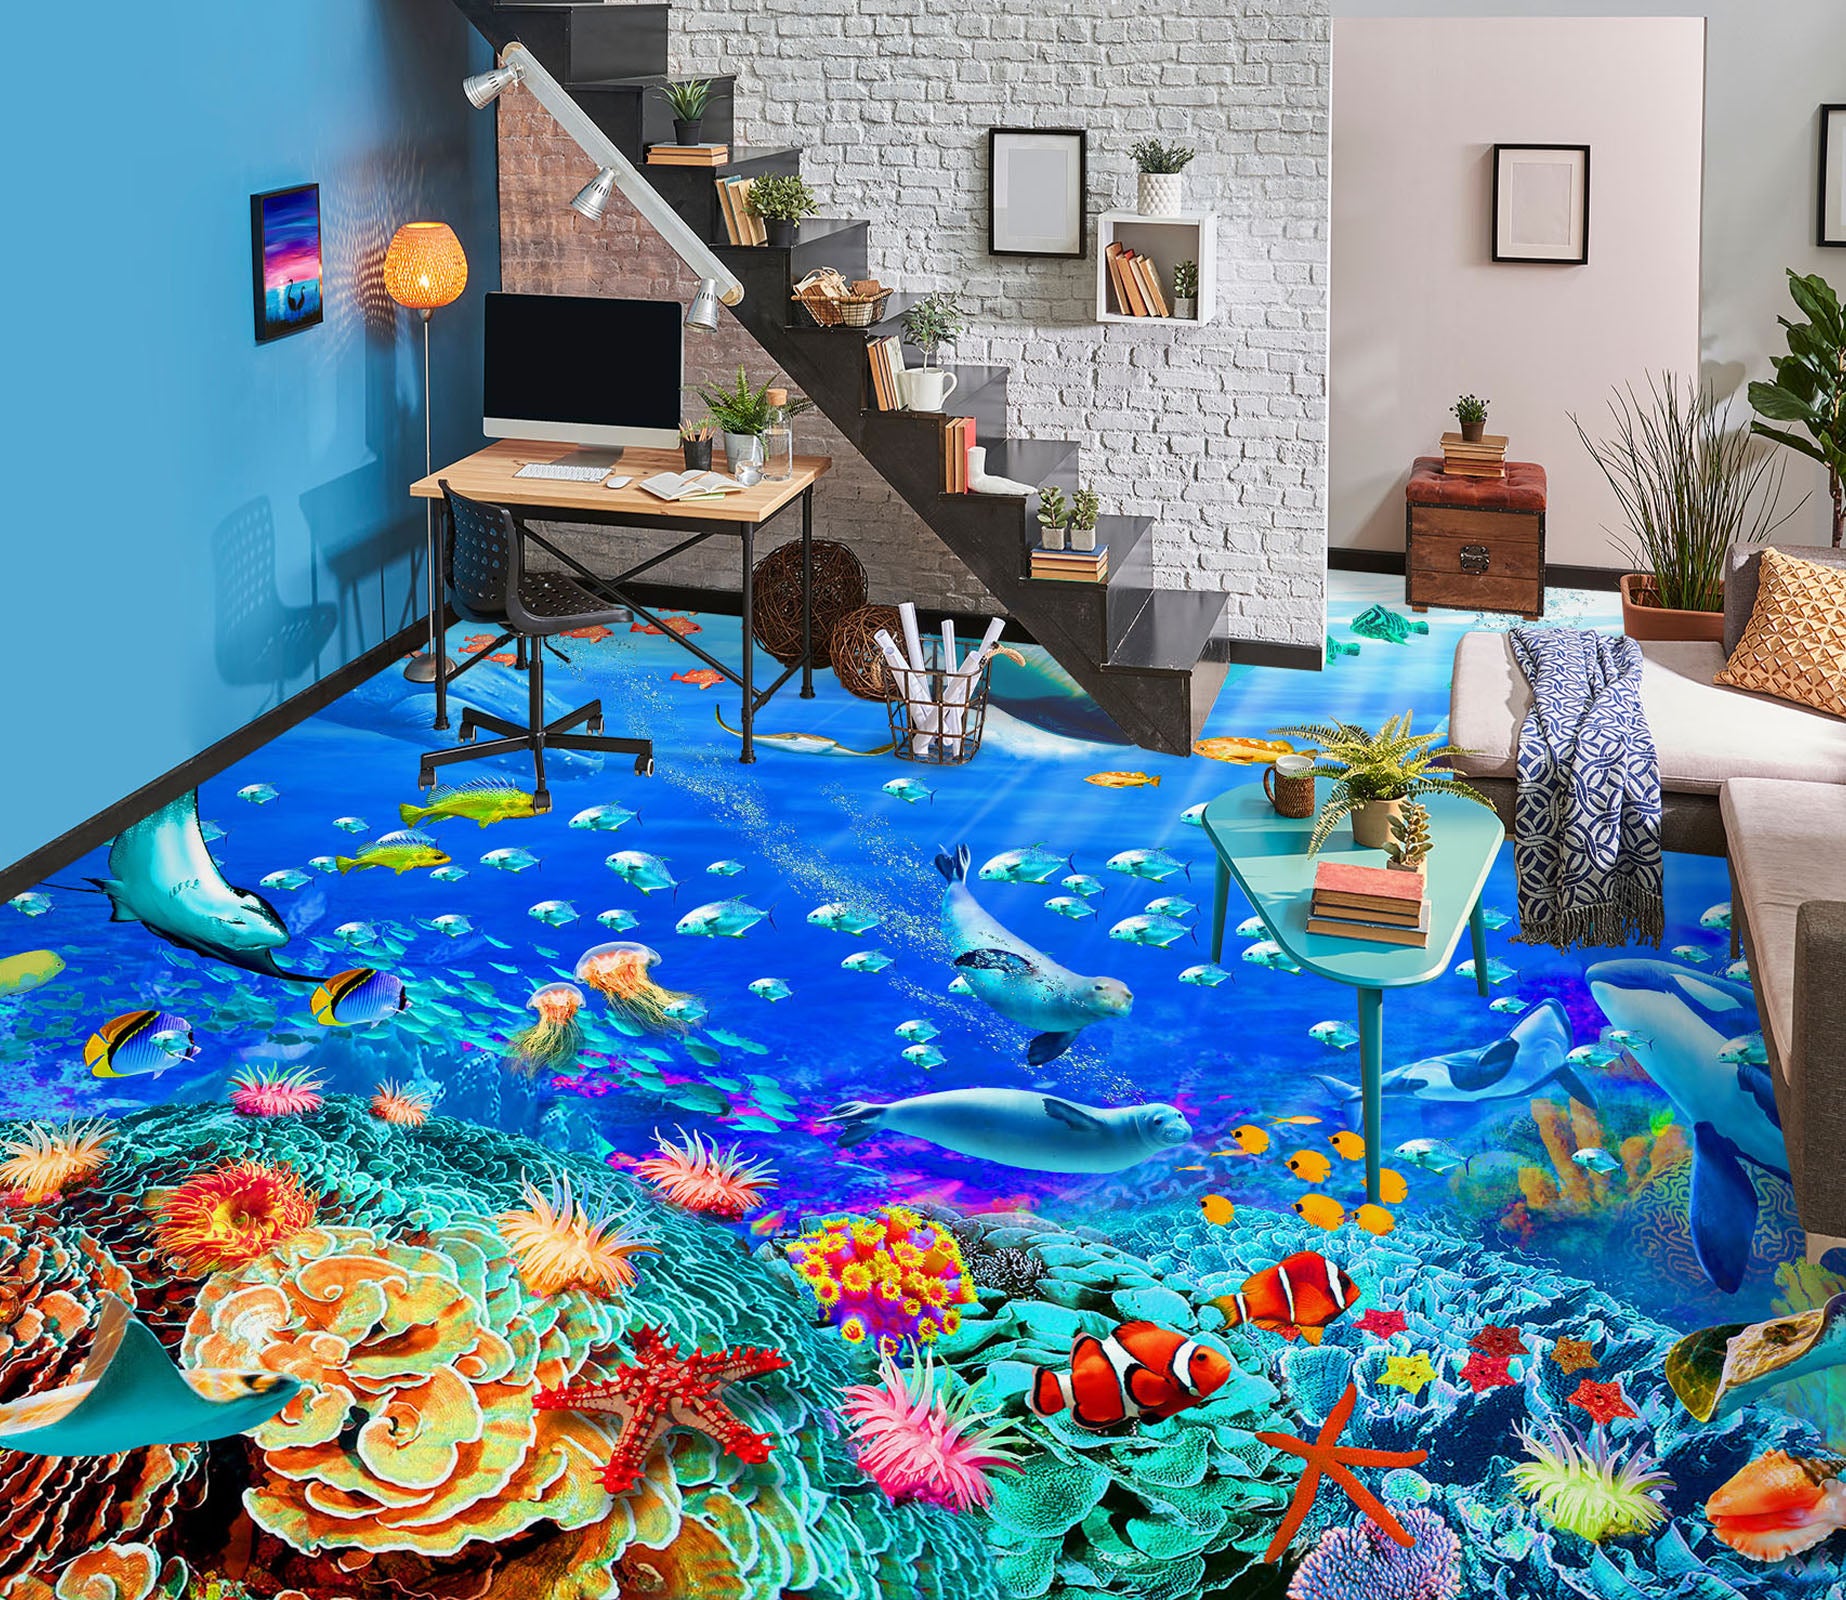 3D Seabed Fish 98164 Adrian Chesterman Floor Mural  Wallpaper Murals Self-Adhesive Removable Print Epoxy